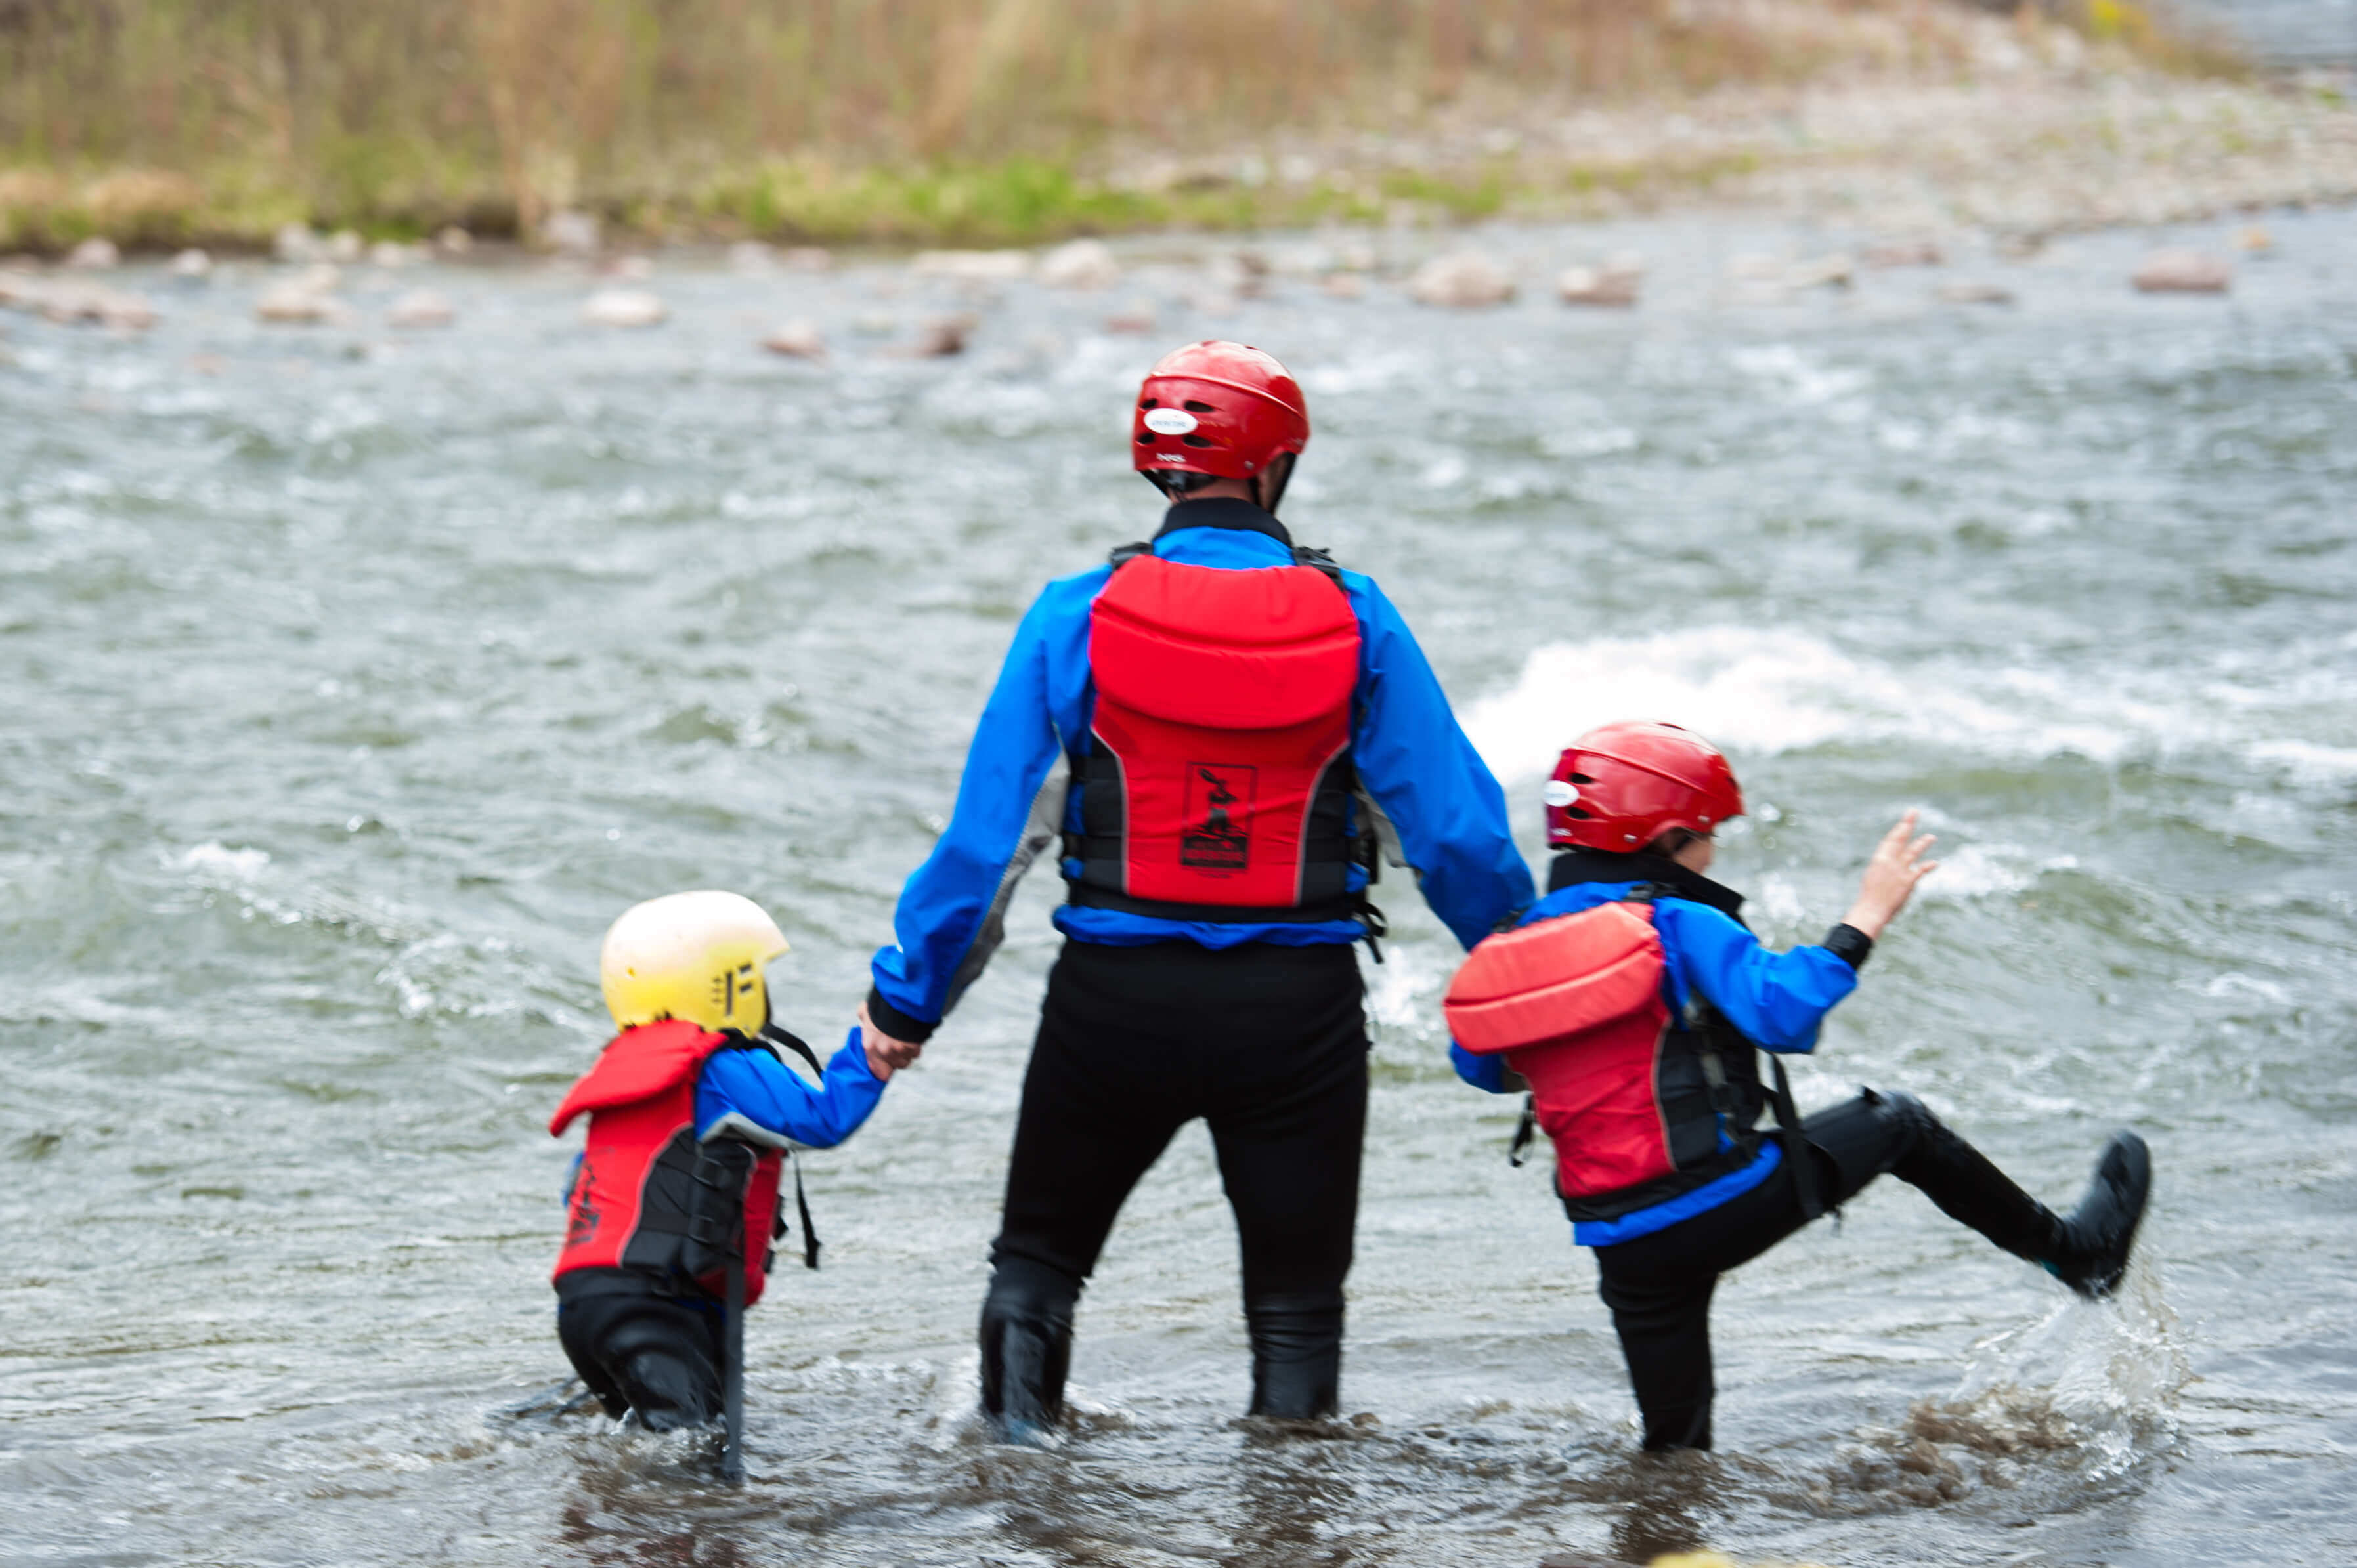 white water rafting with kids playing in river